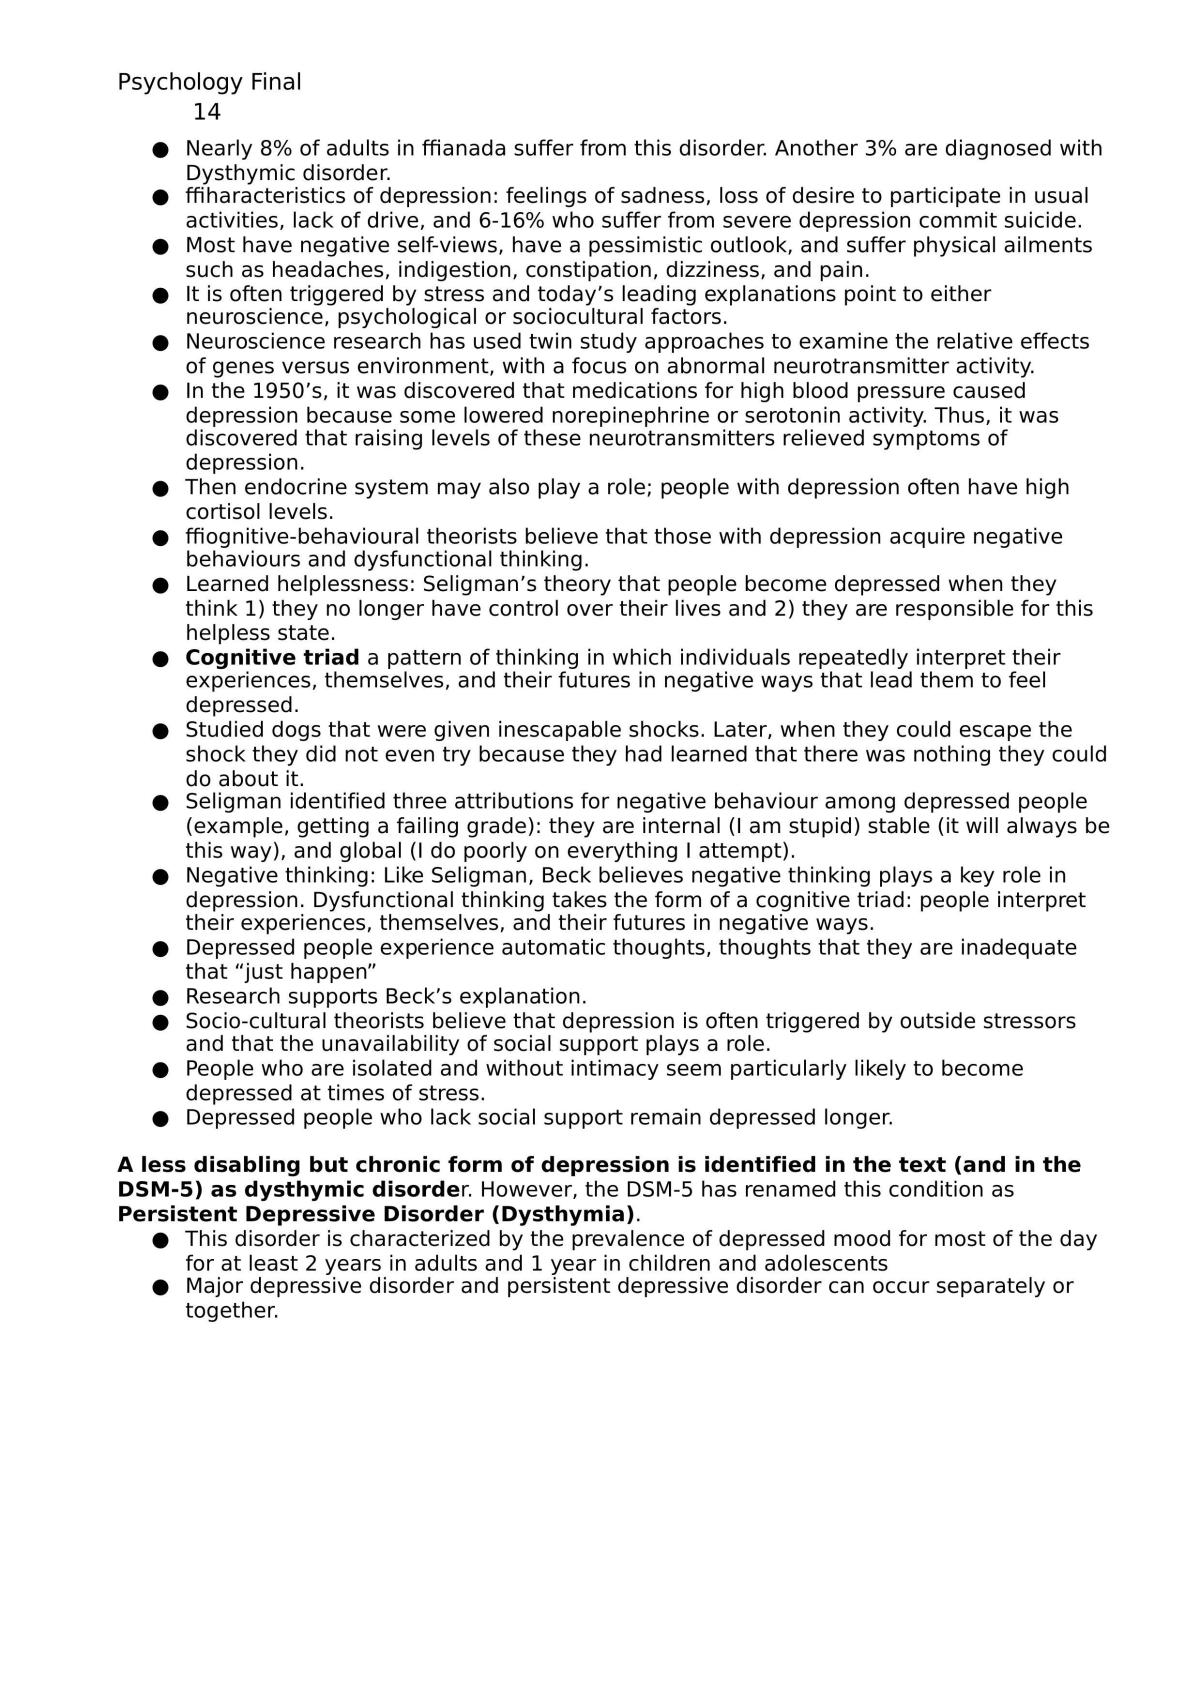 Introduction to Psychology Exam Study Guide - Page 14